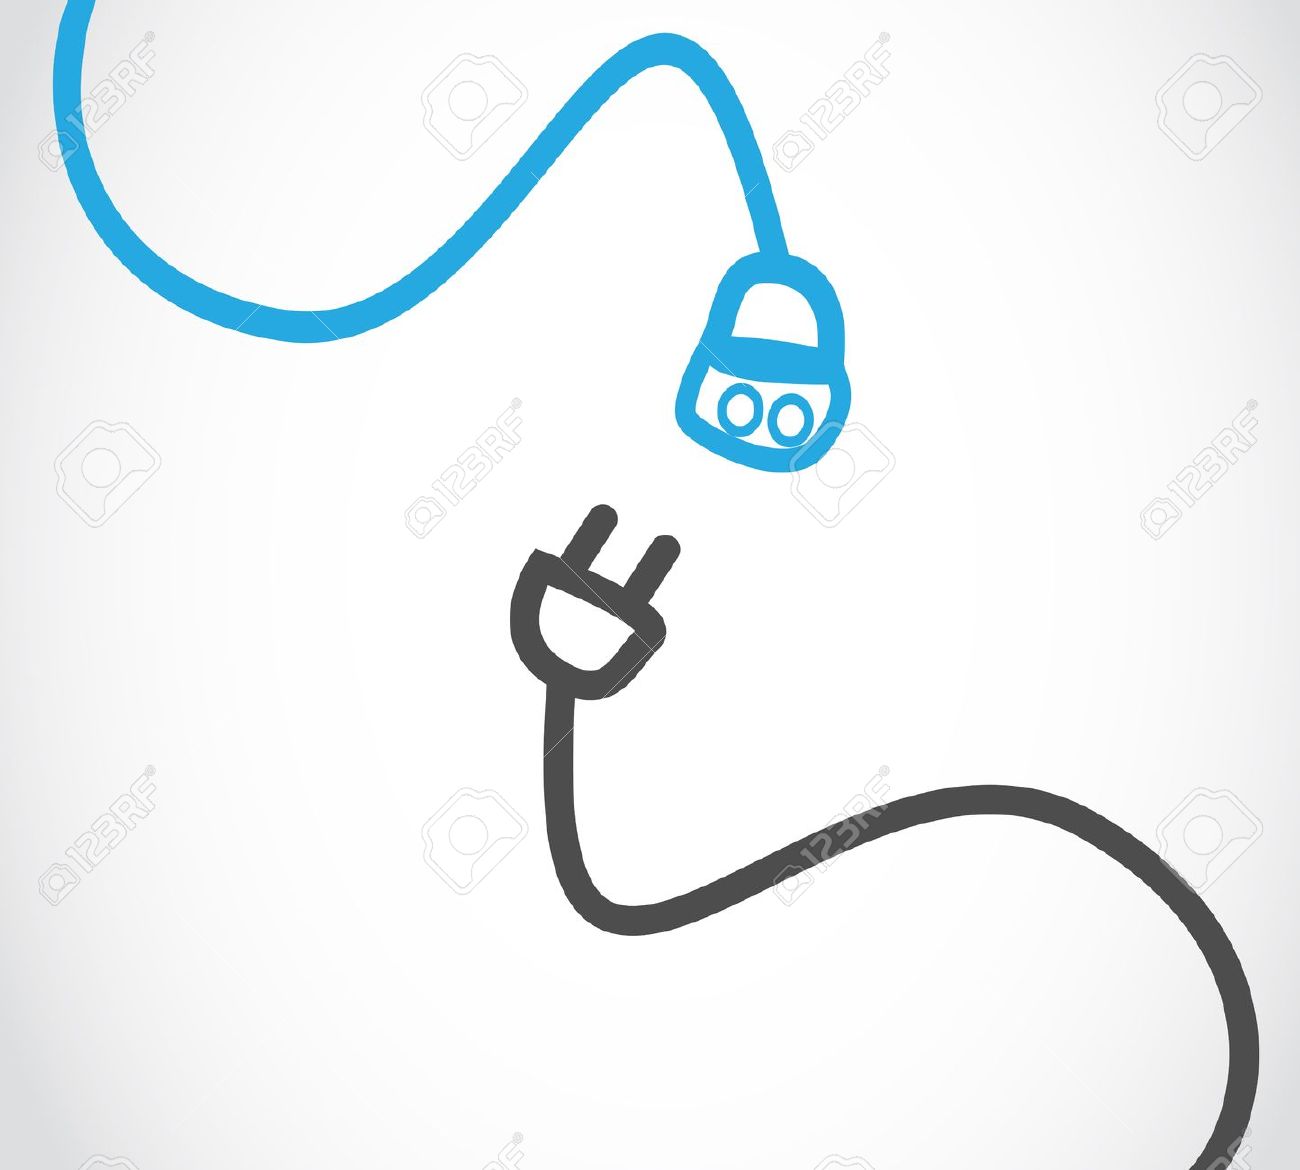 free clipart images electrical - photo #32